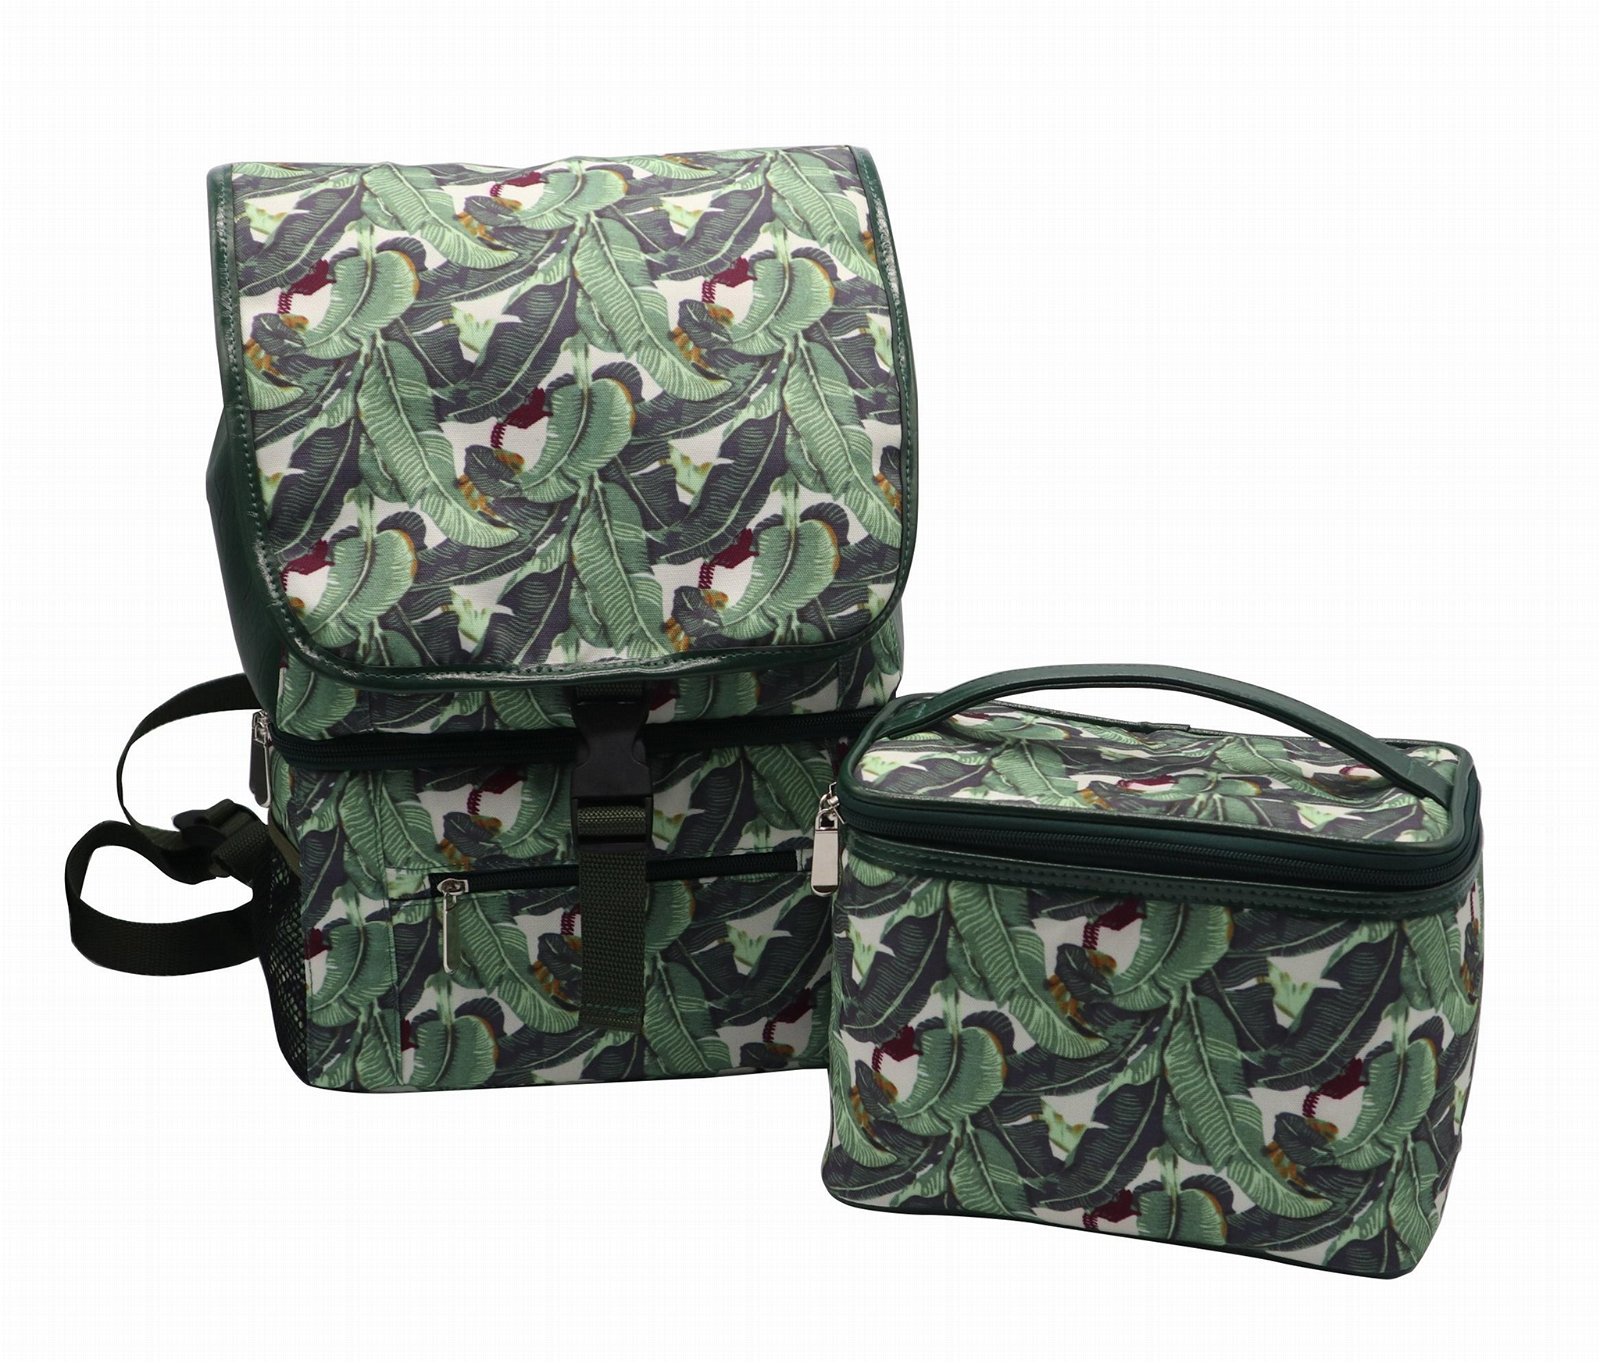 Matt PVC coated polyester leaves two layers picnic cooler backpack  5